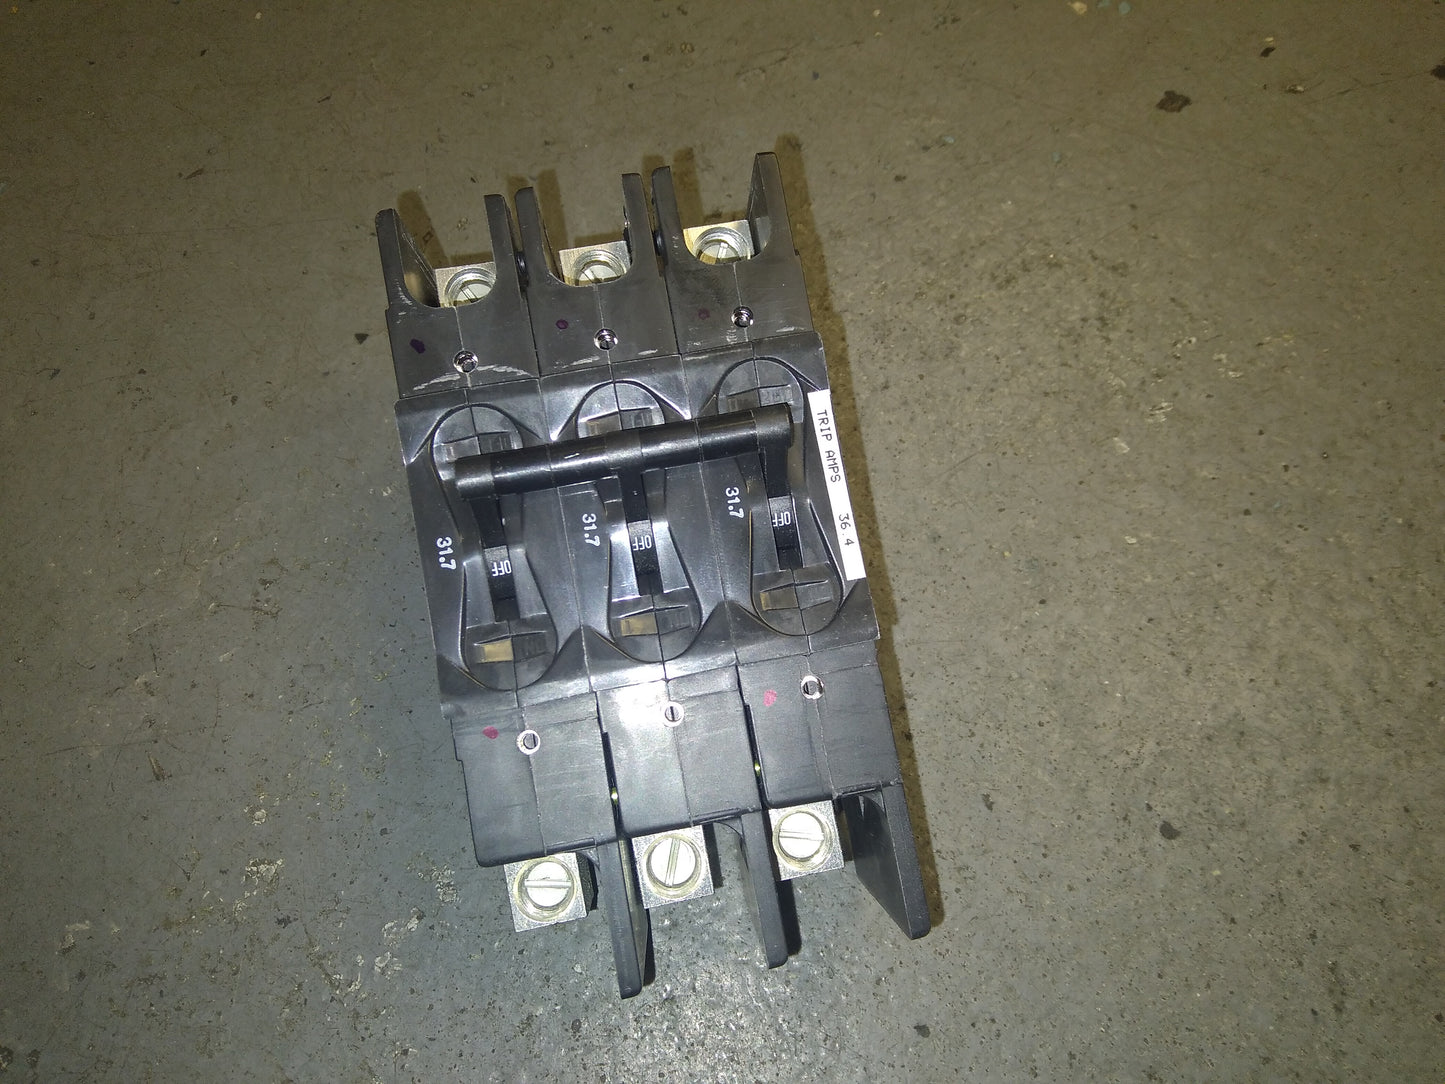 3 POLE  31.7 AMP "219 MULTI-POLE" SERIES HYDRAULIC MAGNETIC CIRCUIT BREAKER PROTECTOR/FOR MANUAL MOTOR CONTROLLER APPLICATIONS 480/50-60/1 OR 3